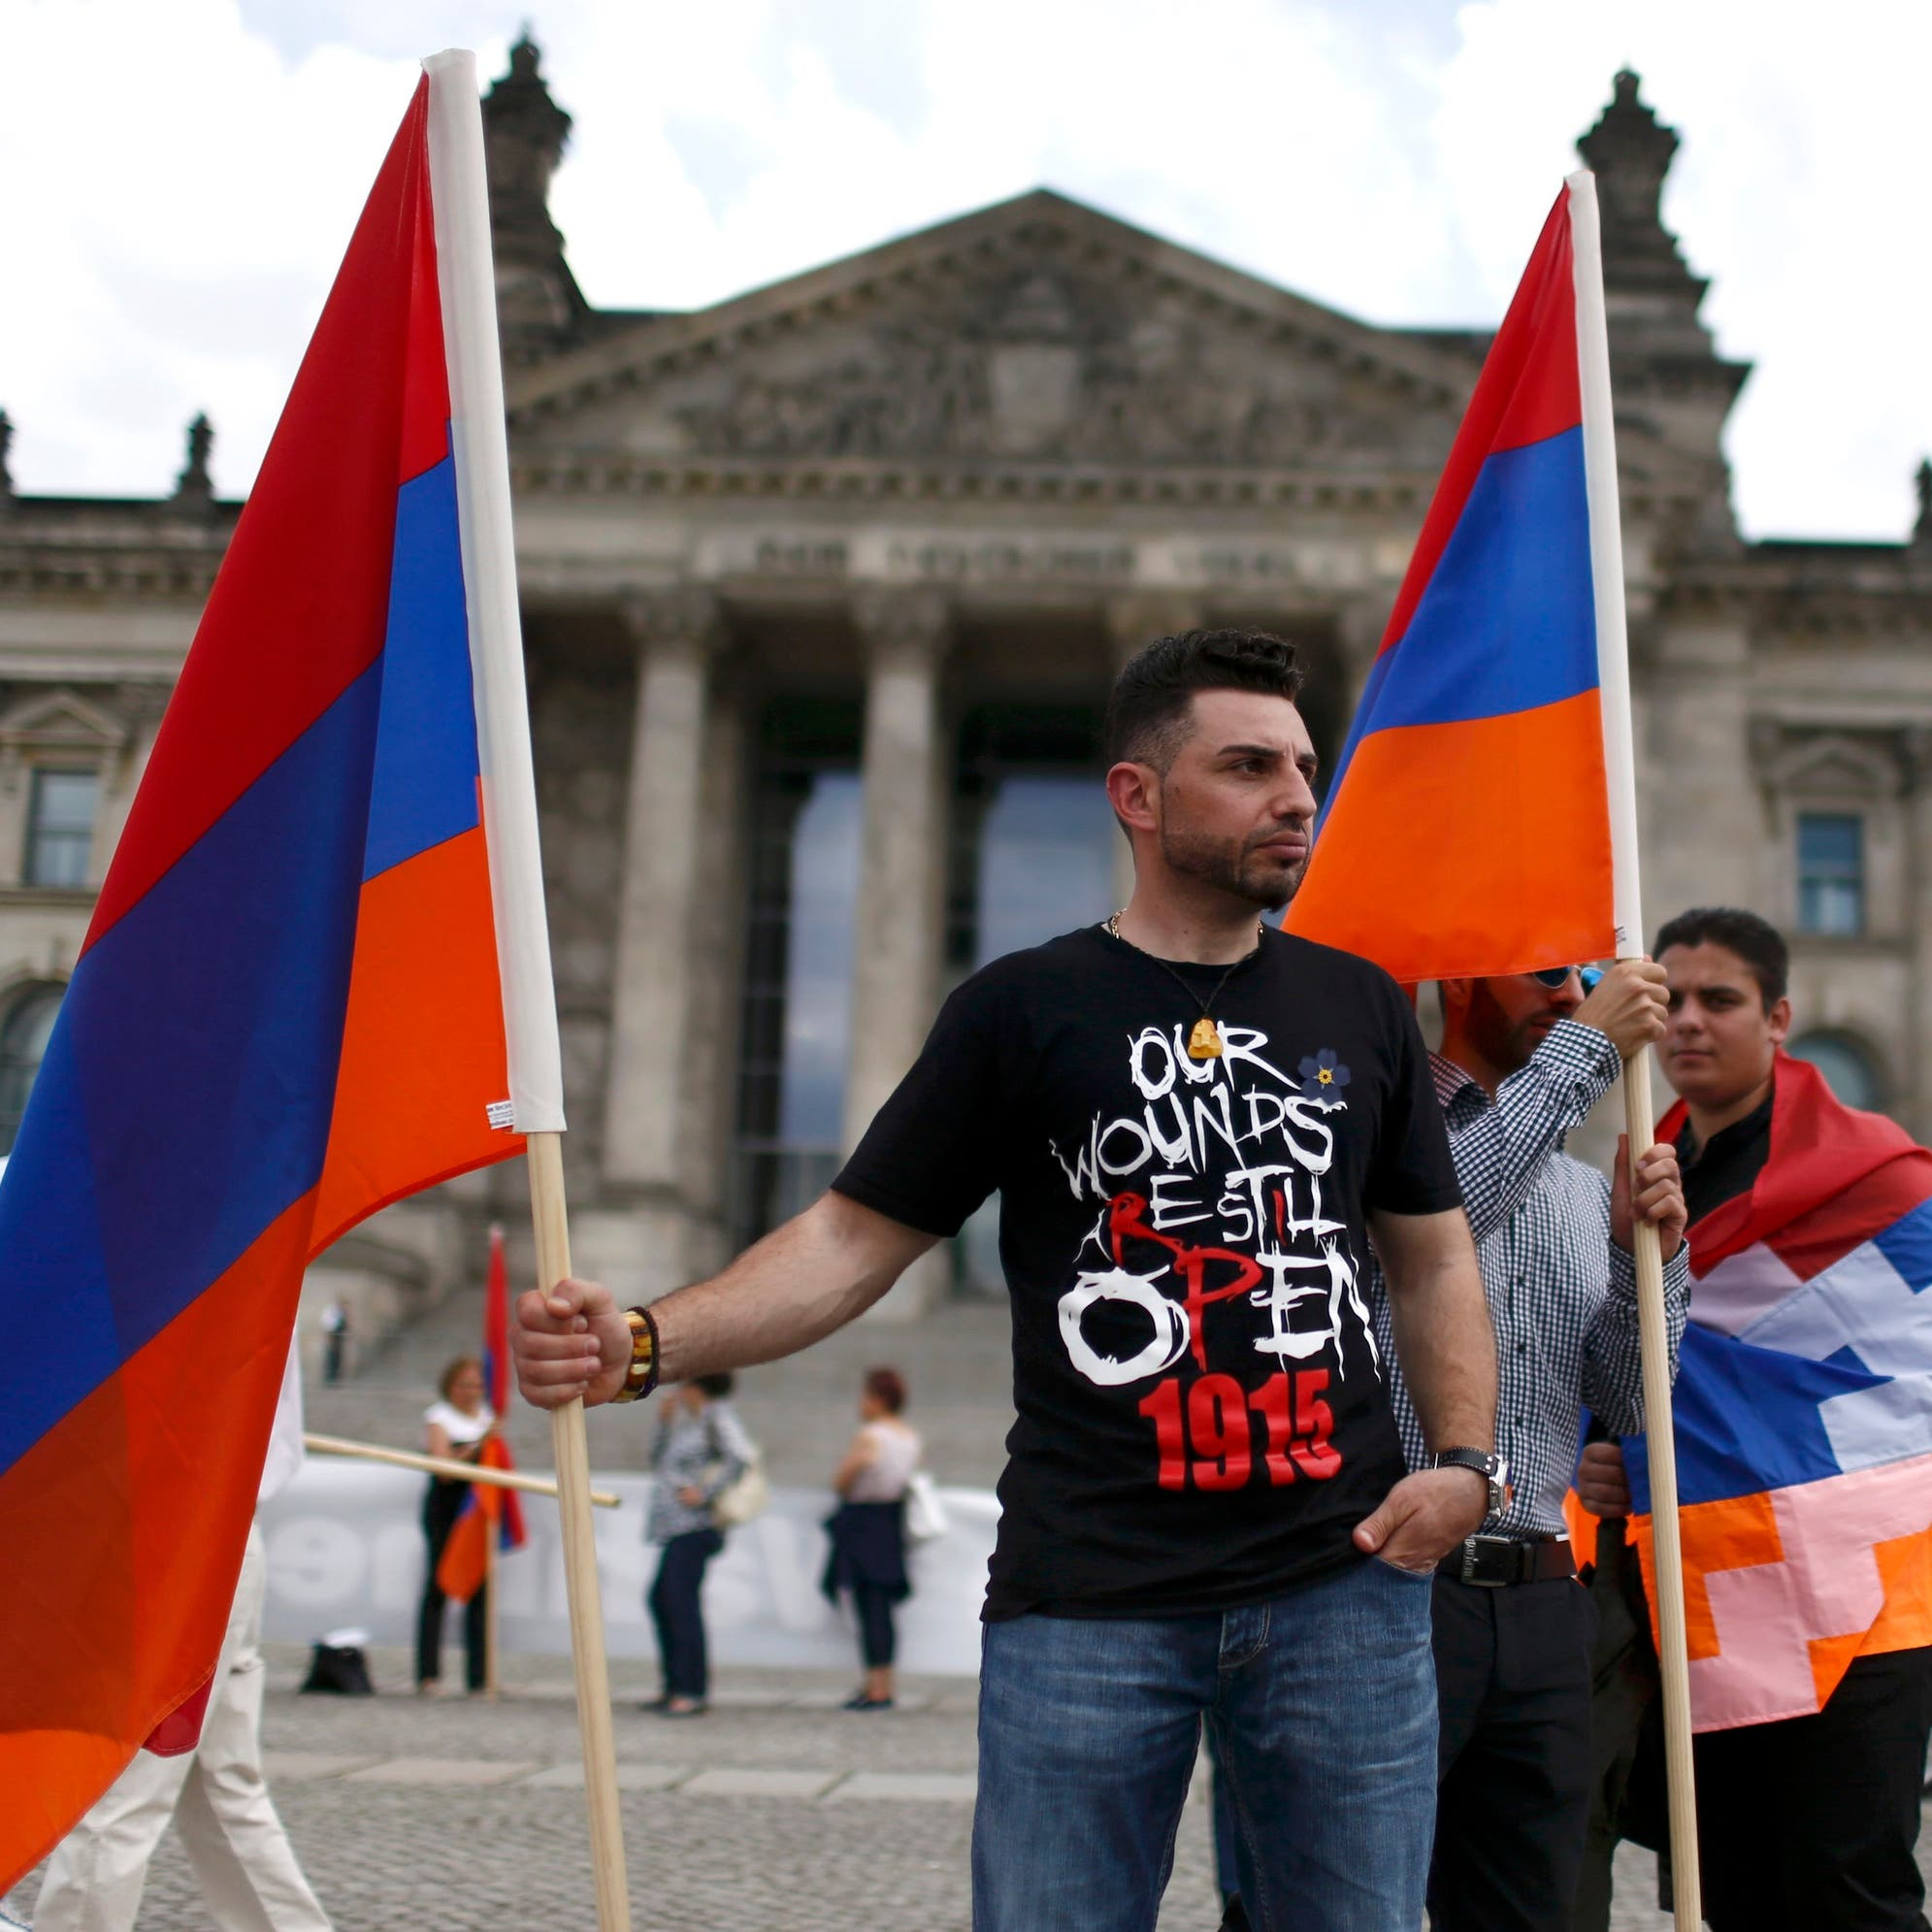 Germany recognizes Armenian ‘genocide,’ angering Turkey